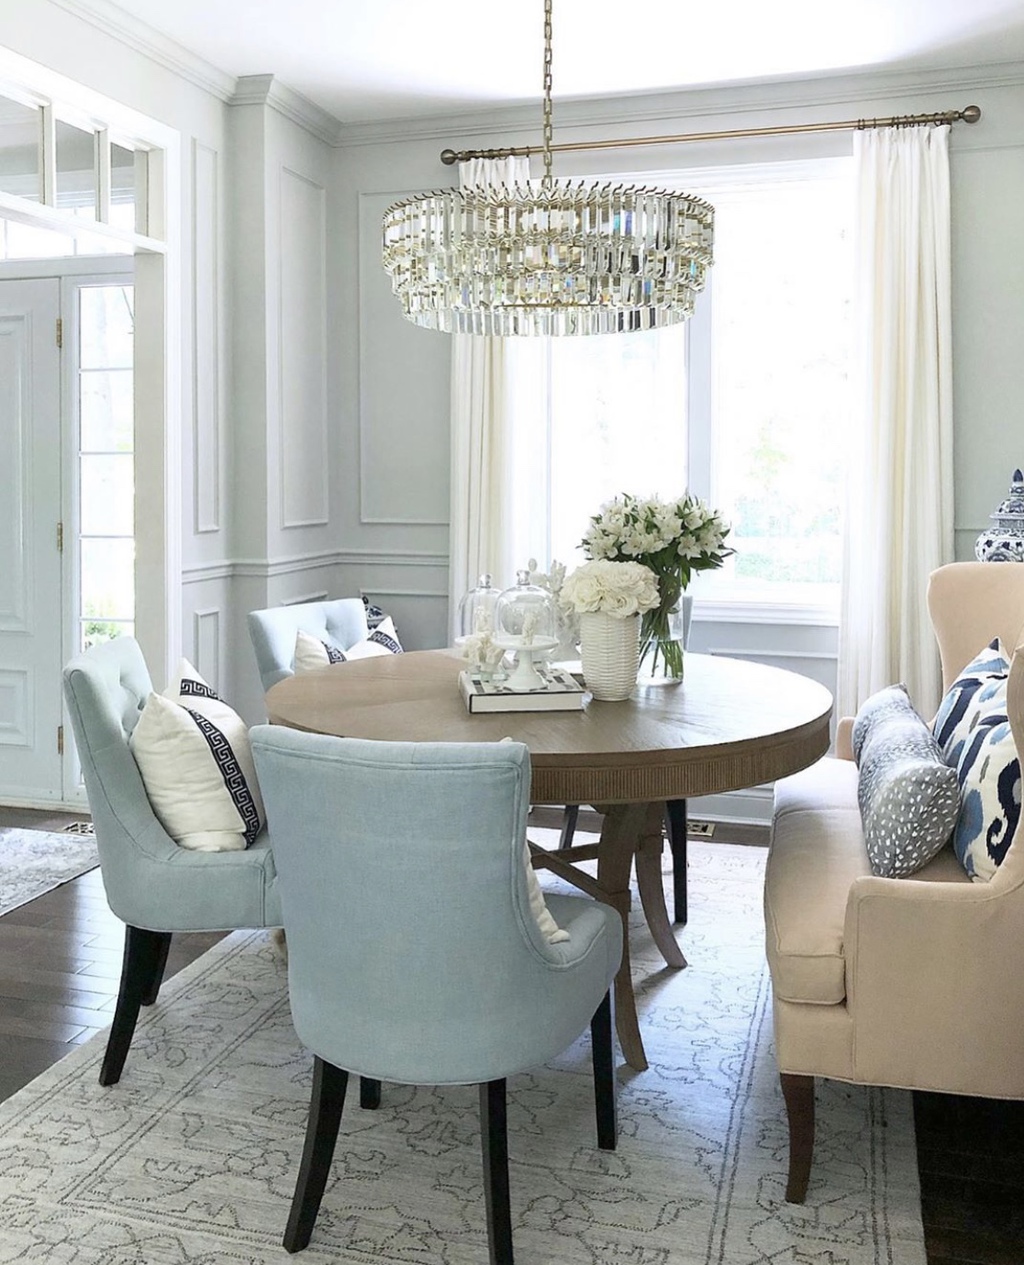 Elegant dining room decor with a coastal look in soft greys, light blues and natural tones.